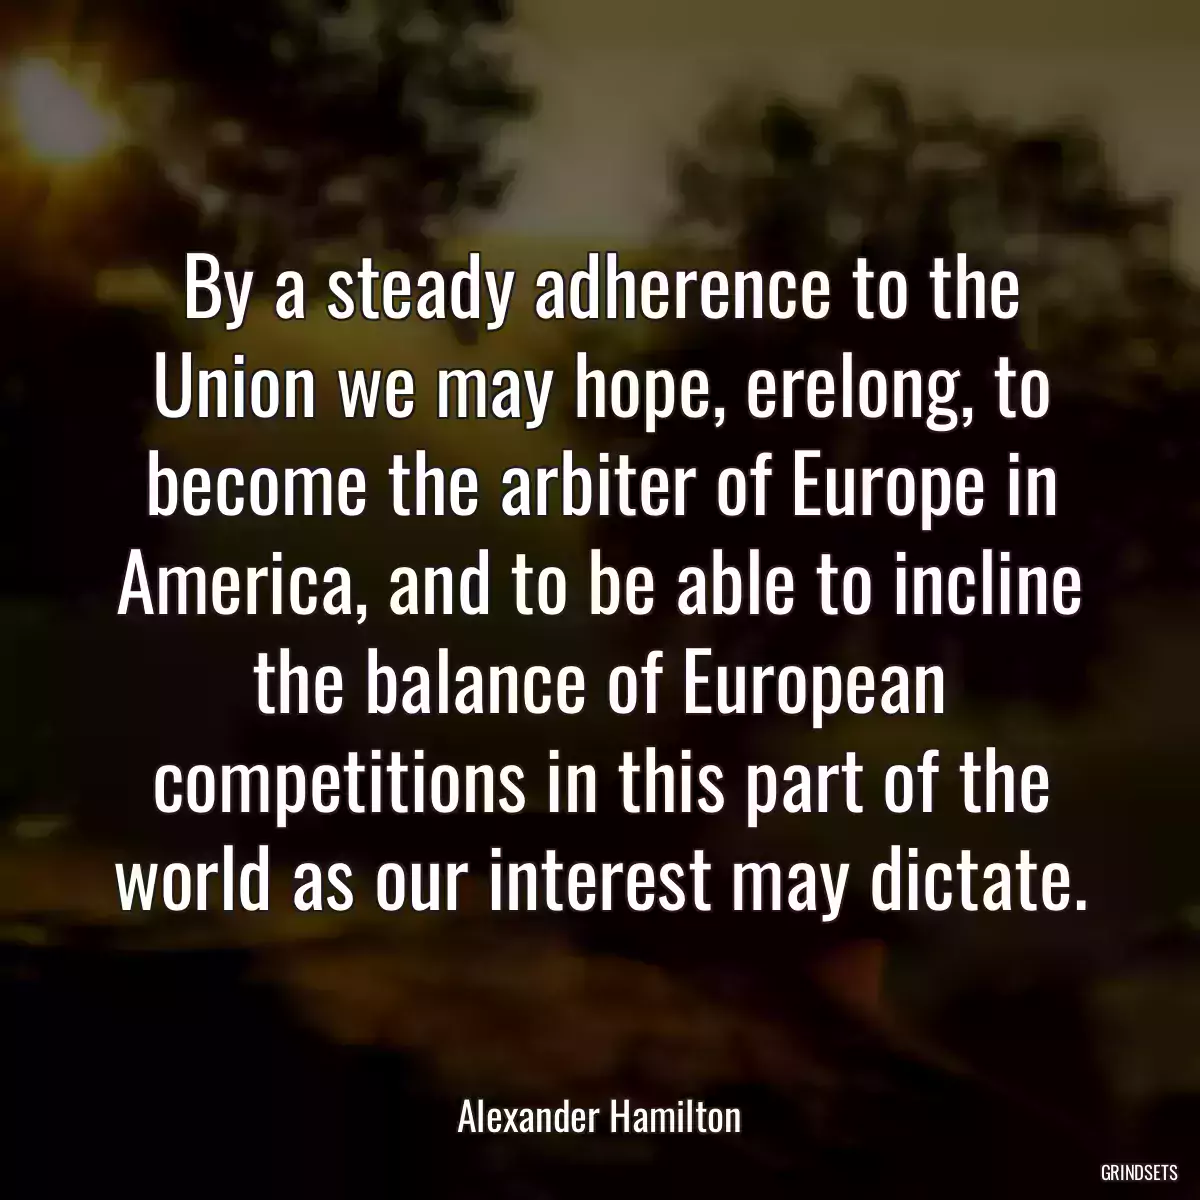 By a steady adherence to the Union we may hope, erelong, to become the arbiter of Europe in America, and to be able to incline the balance of European competitions in this part of the world as our interest may dictate.